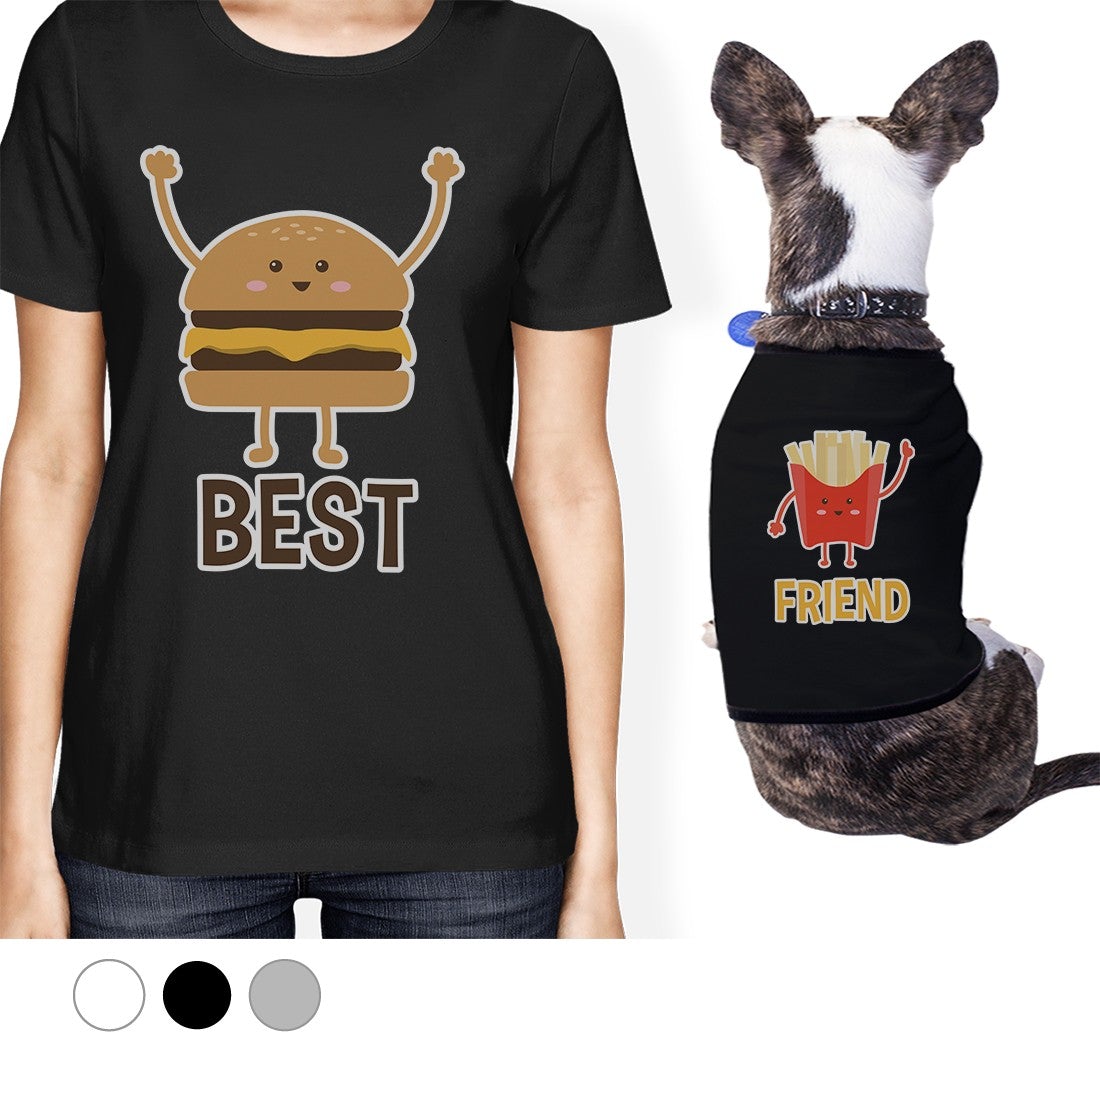 Hamburger And Fries Small Pet Owner Matching Gift Outfits For Her Black